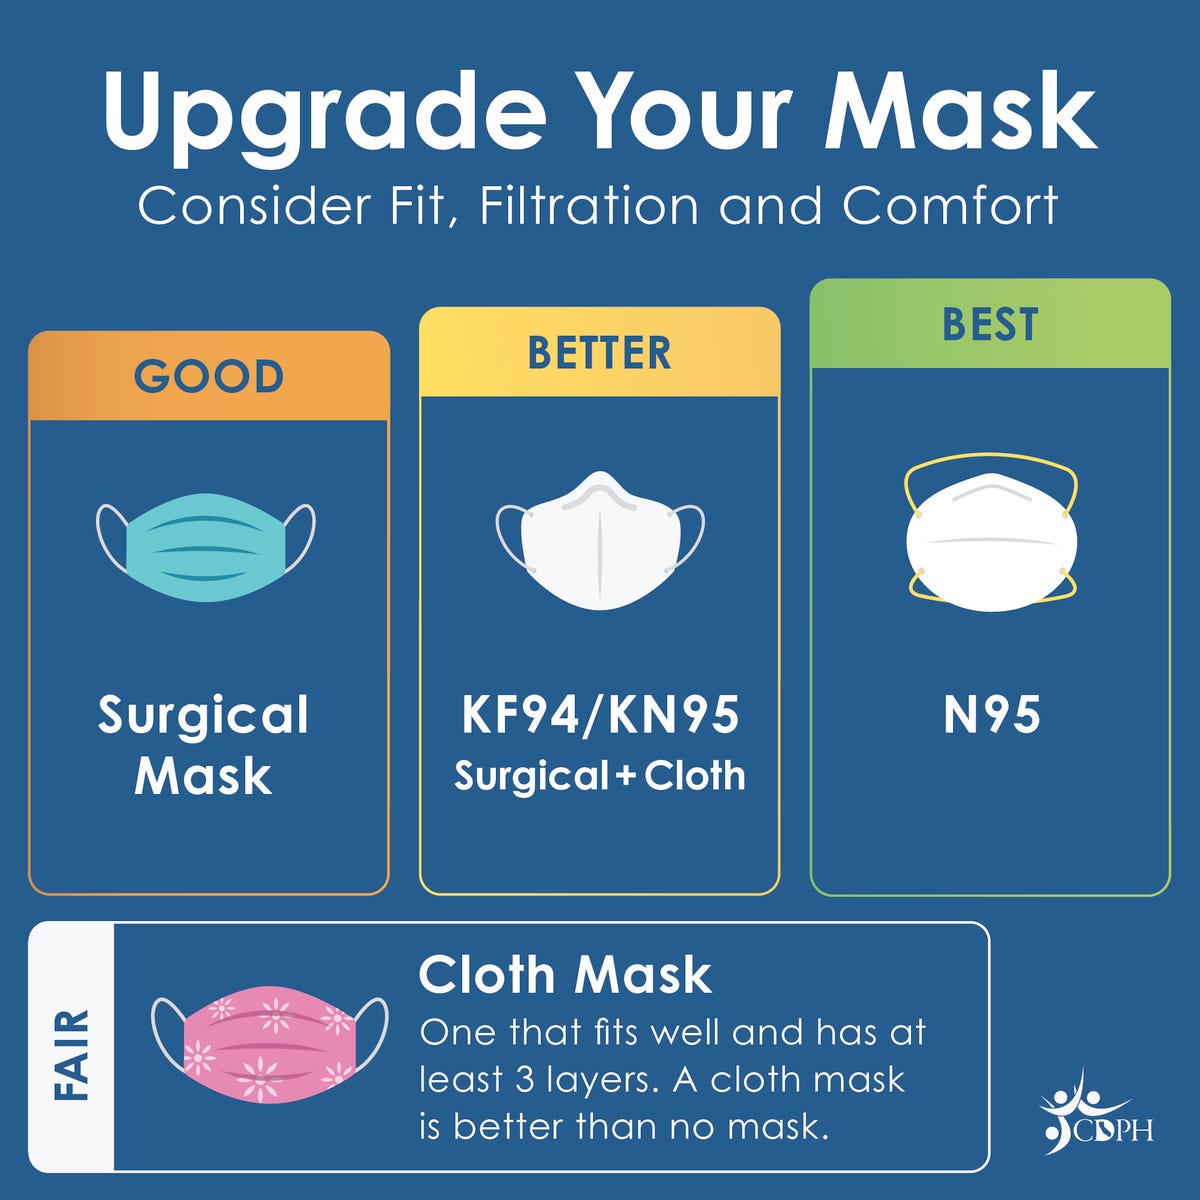 upgrade your mask. consider fit, filtration, and comfort. good surgical mask better kf94 kn95 surgical + cloth best N95, fair cloth mask one that fits well and has at least 3 layers. a cloth mask is better than no mask. CDPH